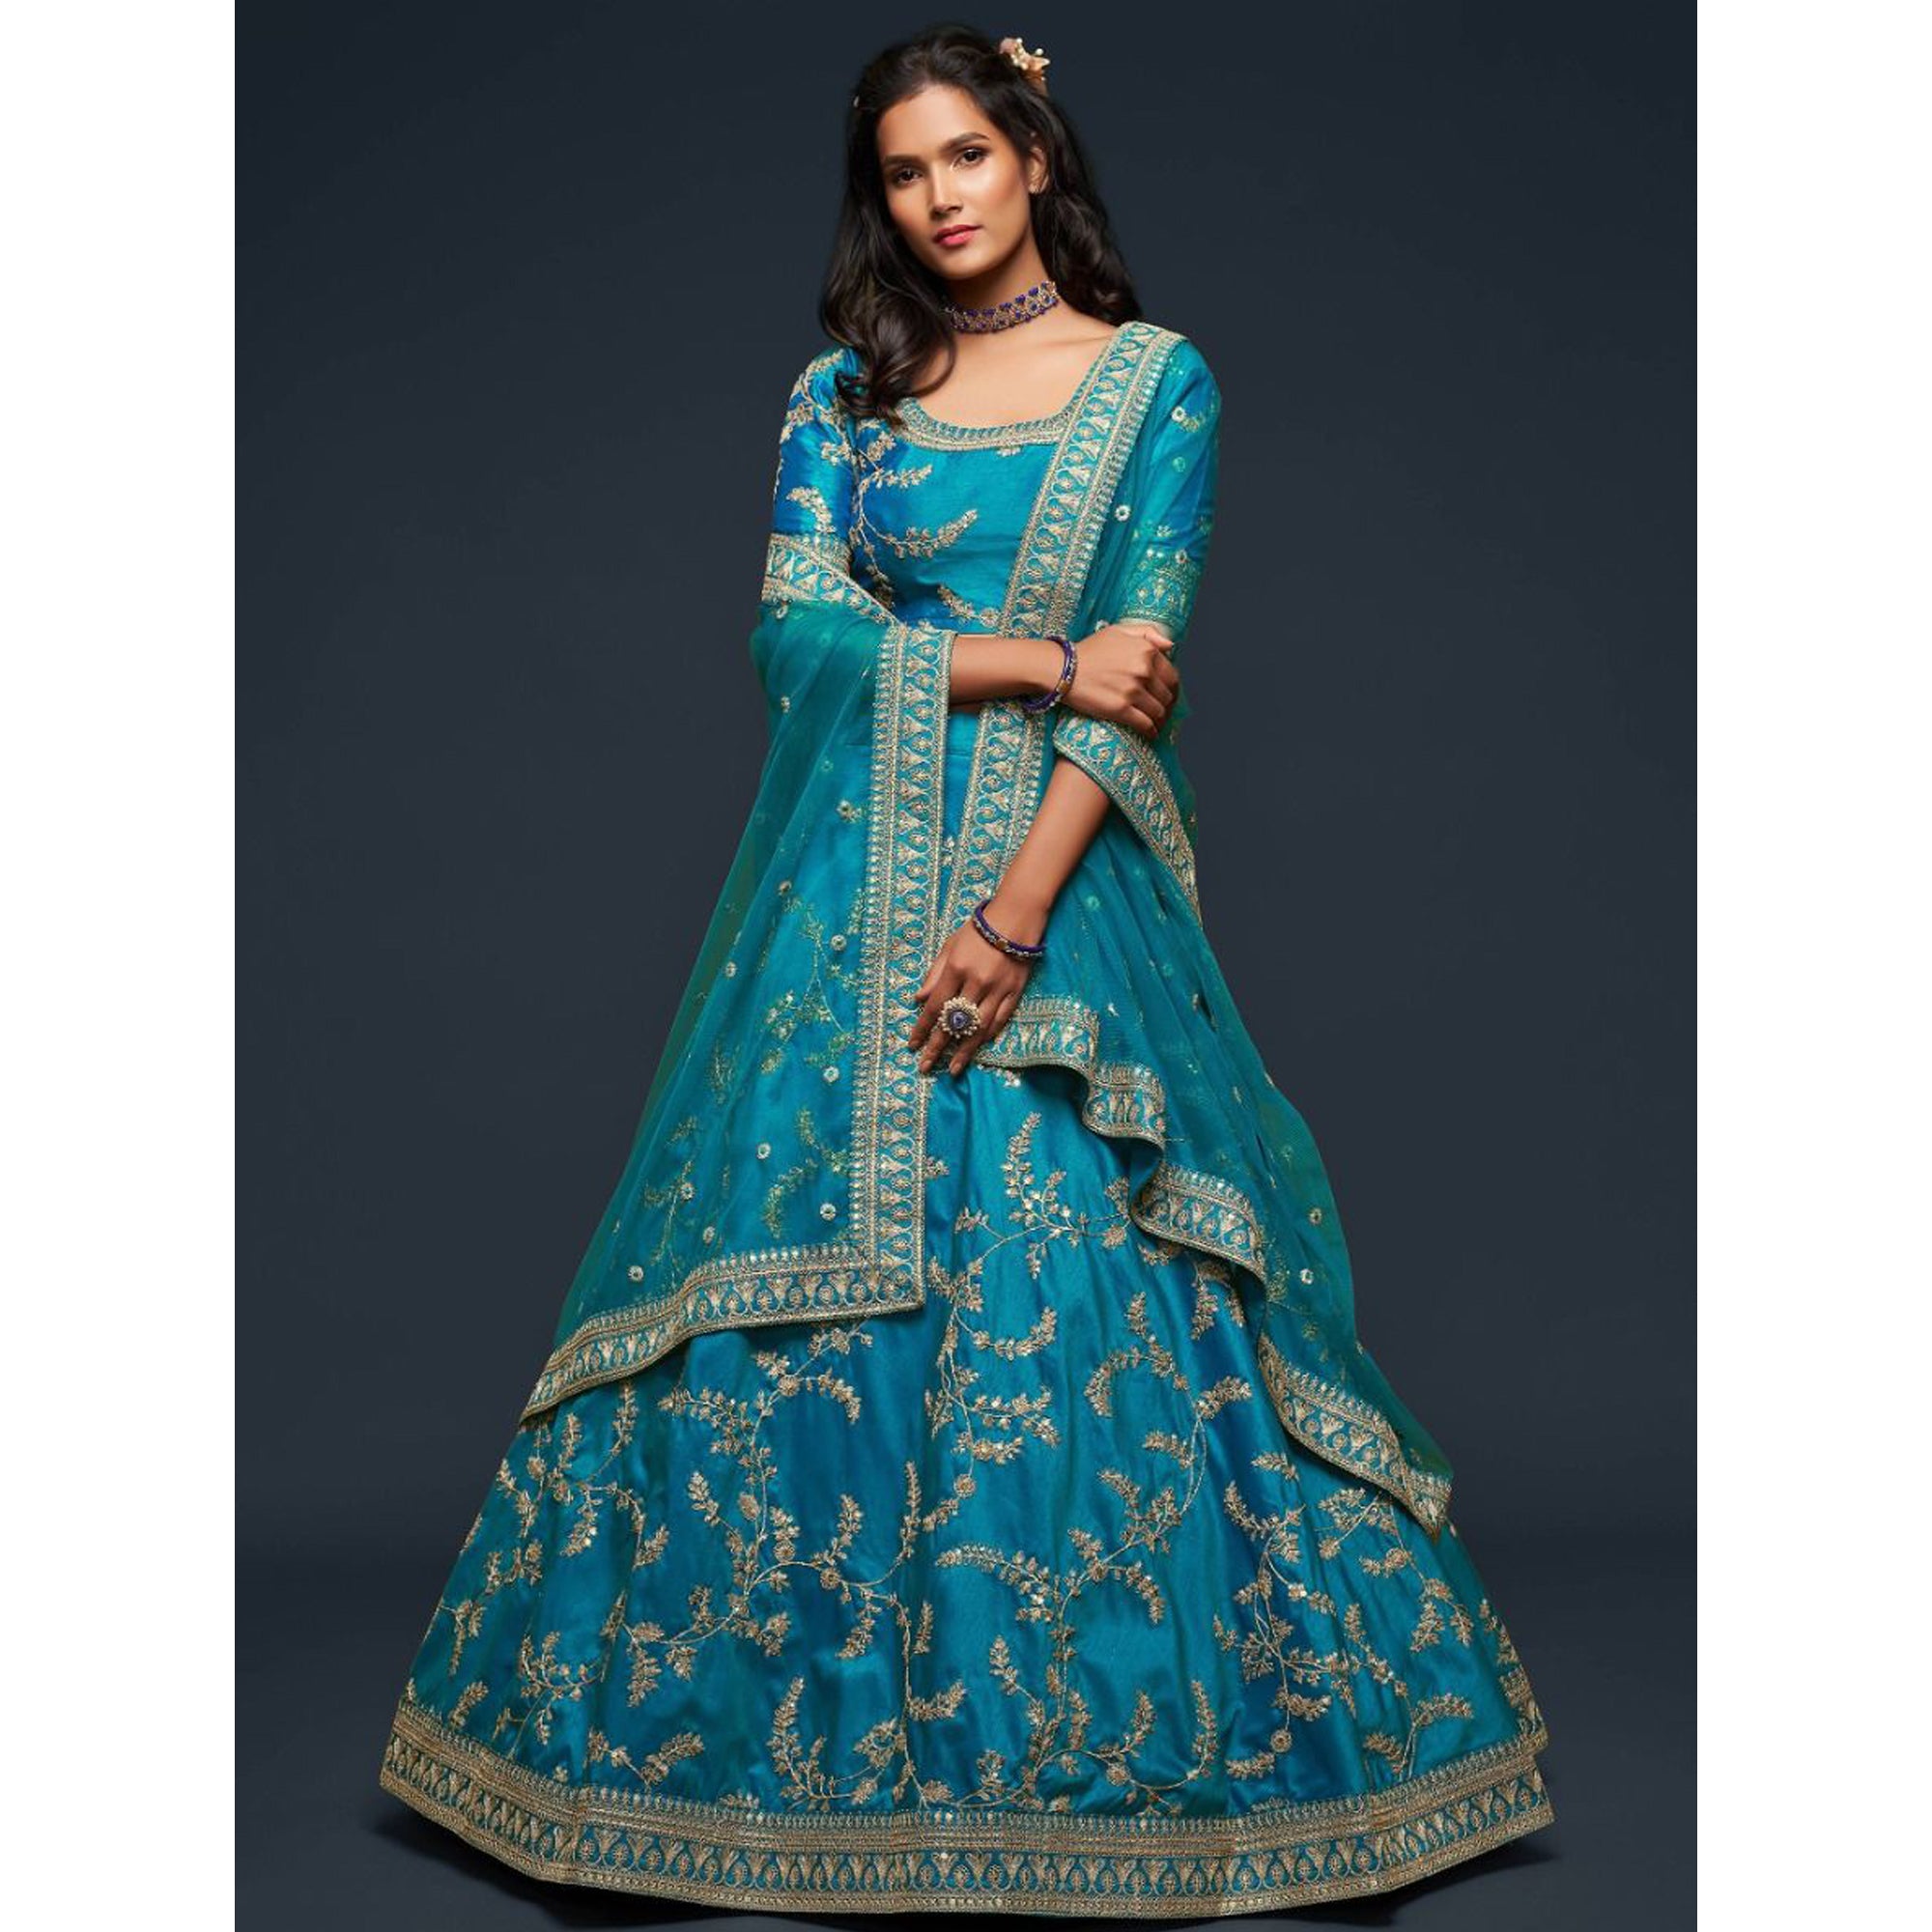 Awesome Navy Blue Color Designer Ready To Wear Lehenga Choli Art Silk Embroidery Work With Net Dupatta